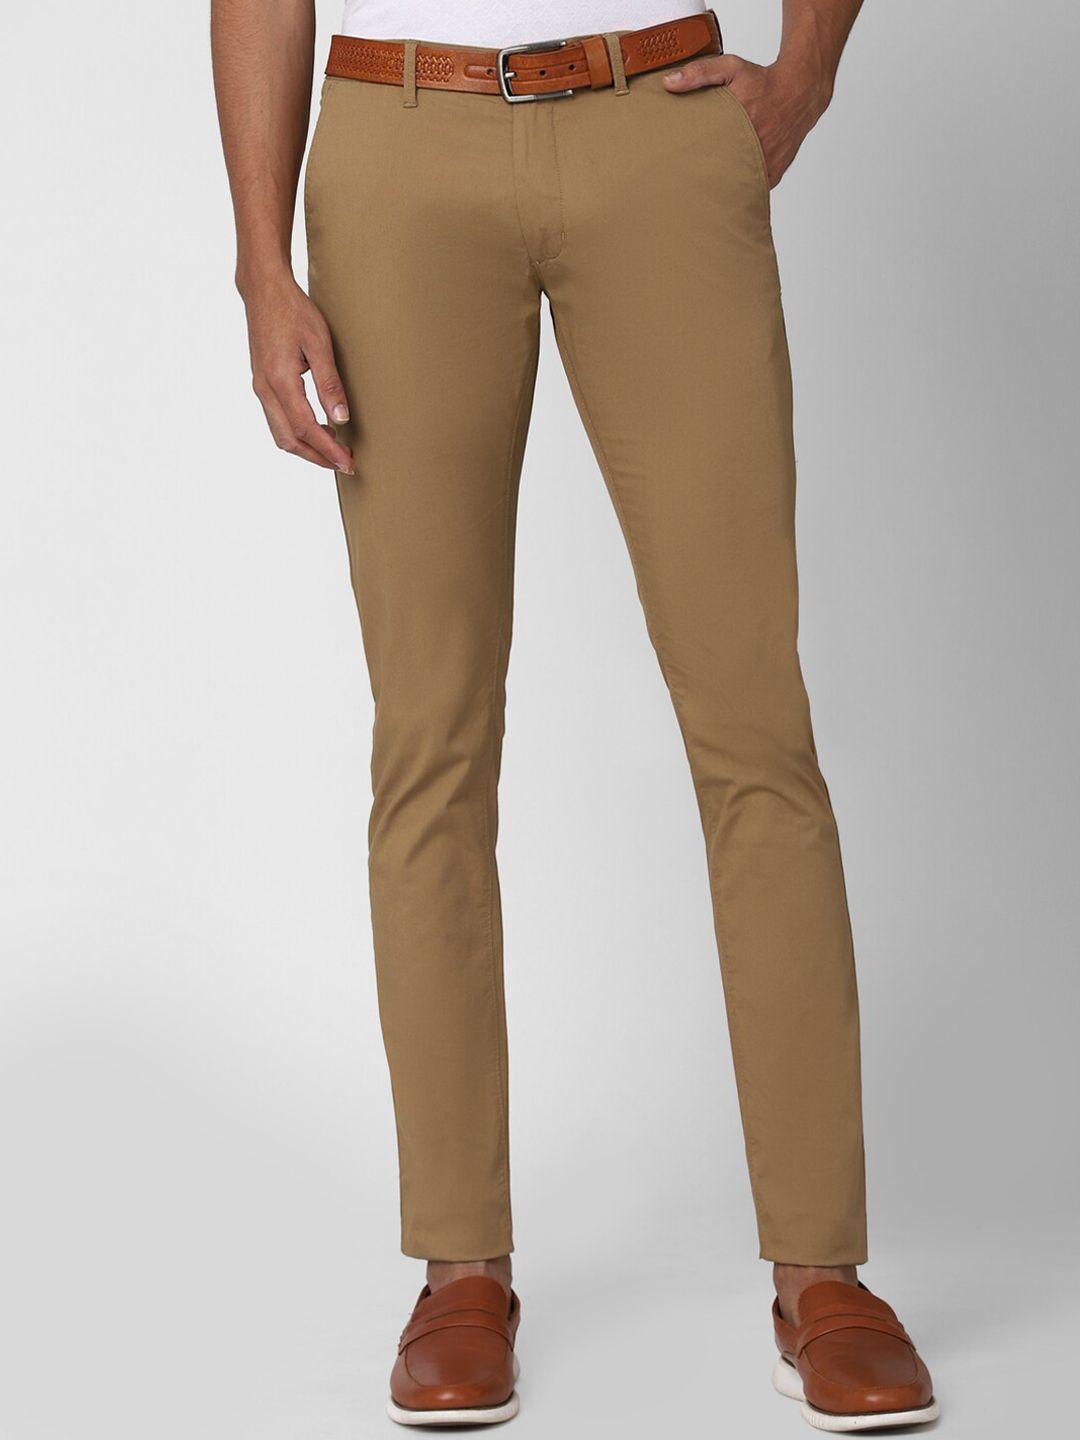 peter england casuals men khaki skinny fit chinos trousers